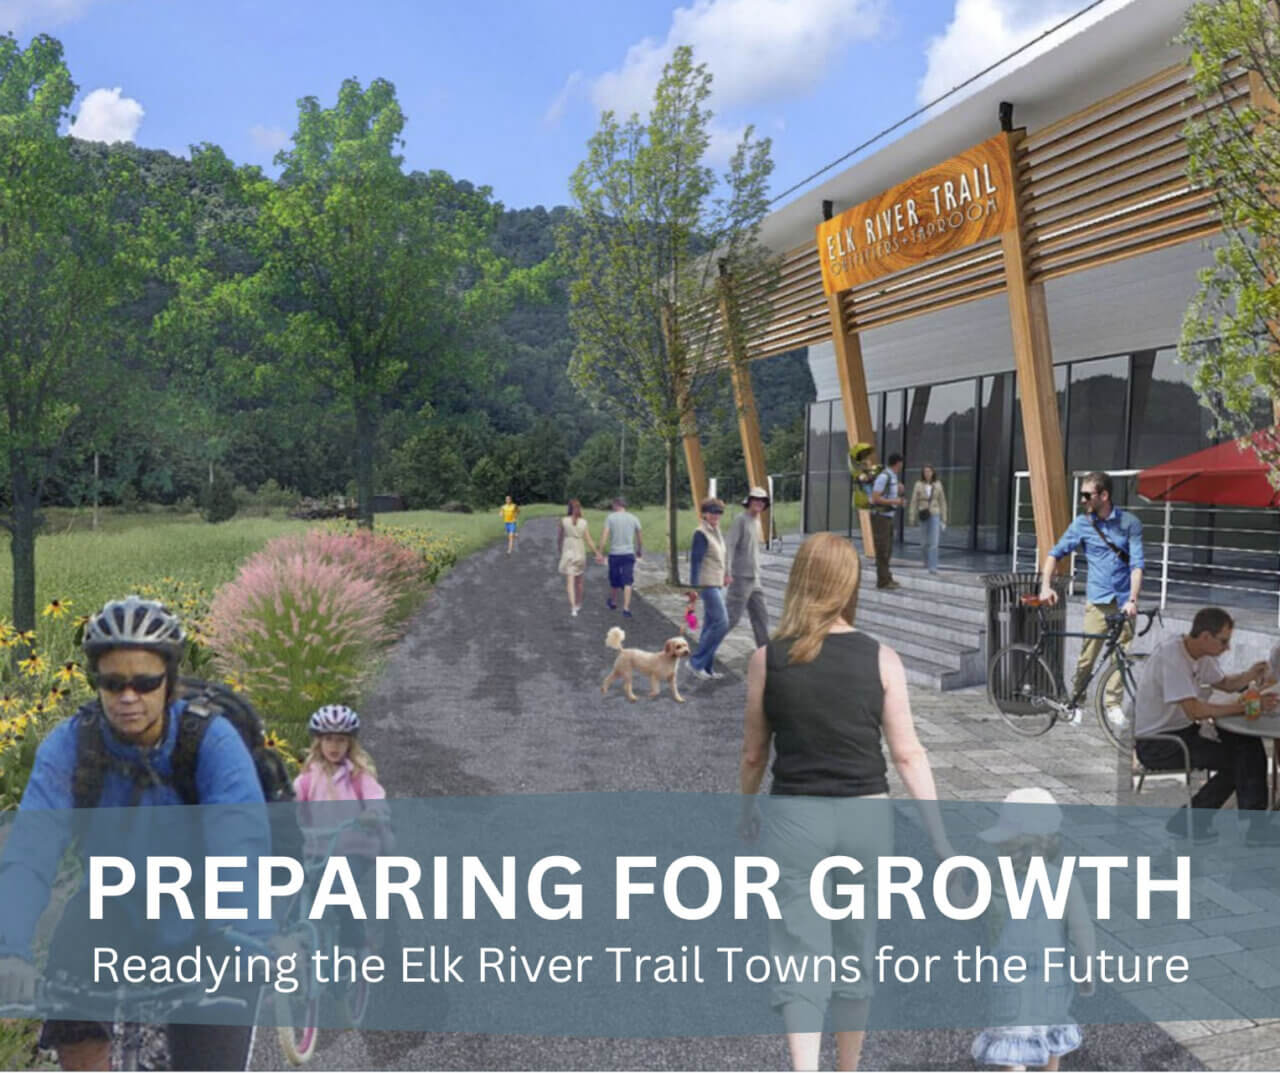 Preparing for Growth: Readying the Elk River Trail Towns for the Future